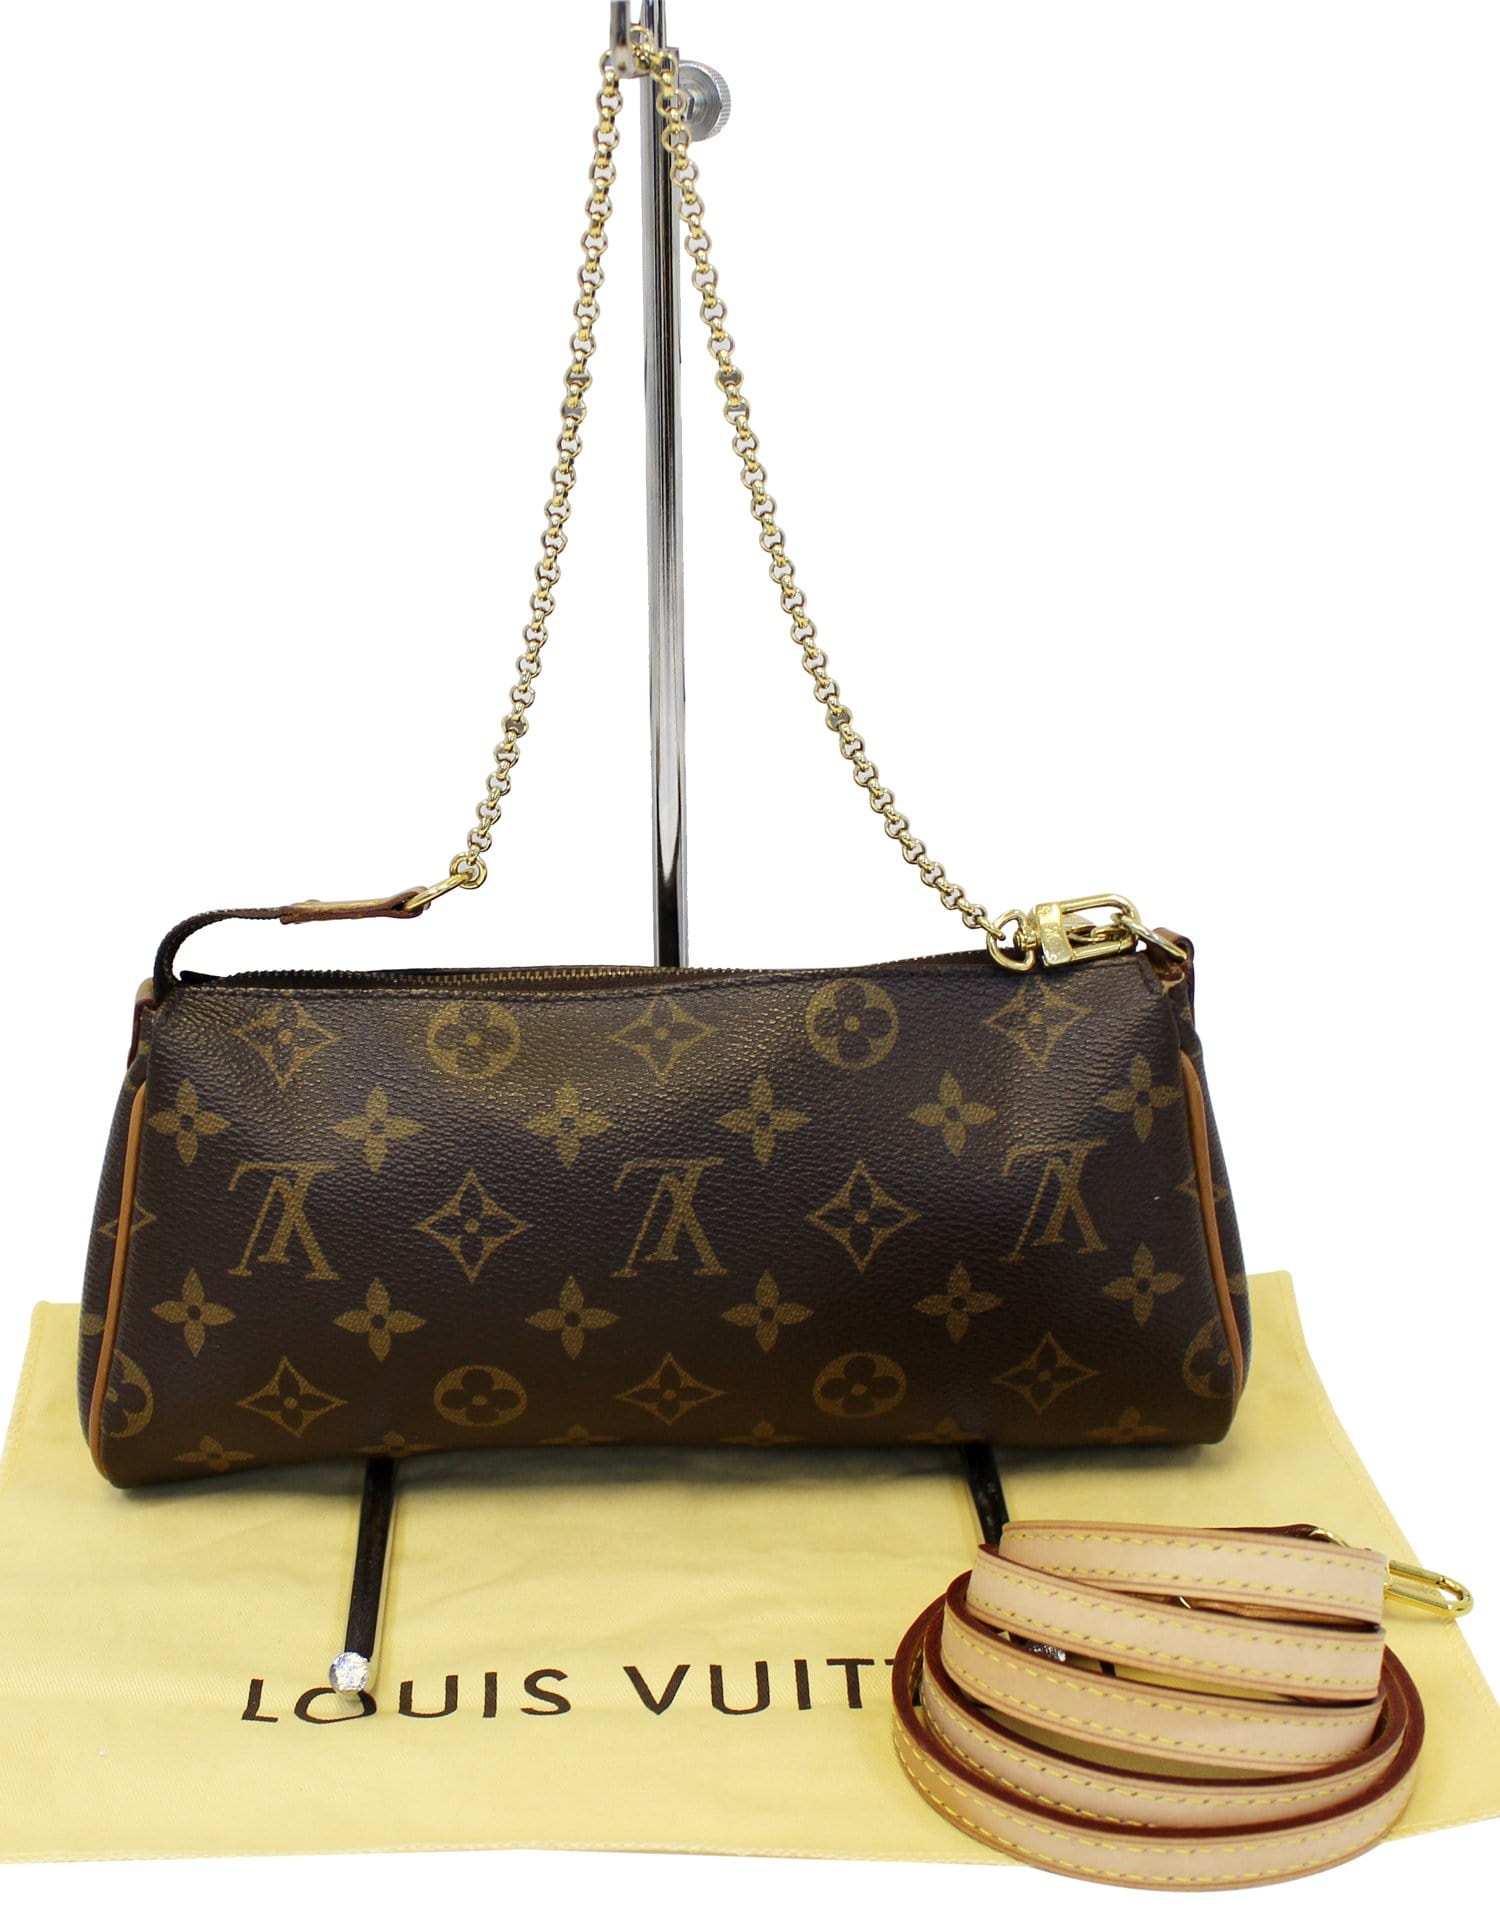 Personalized Félicie clutch bag from the Louis Vuitton …